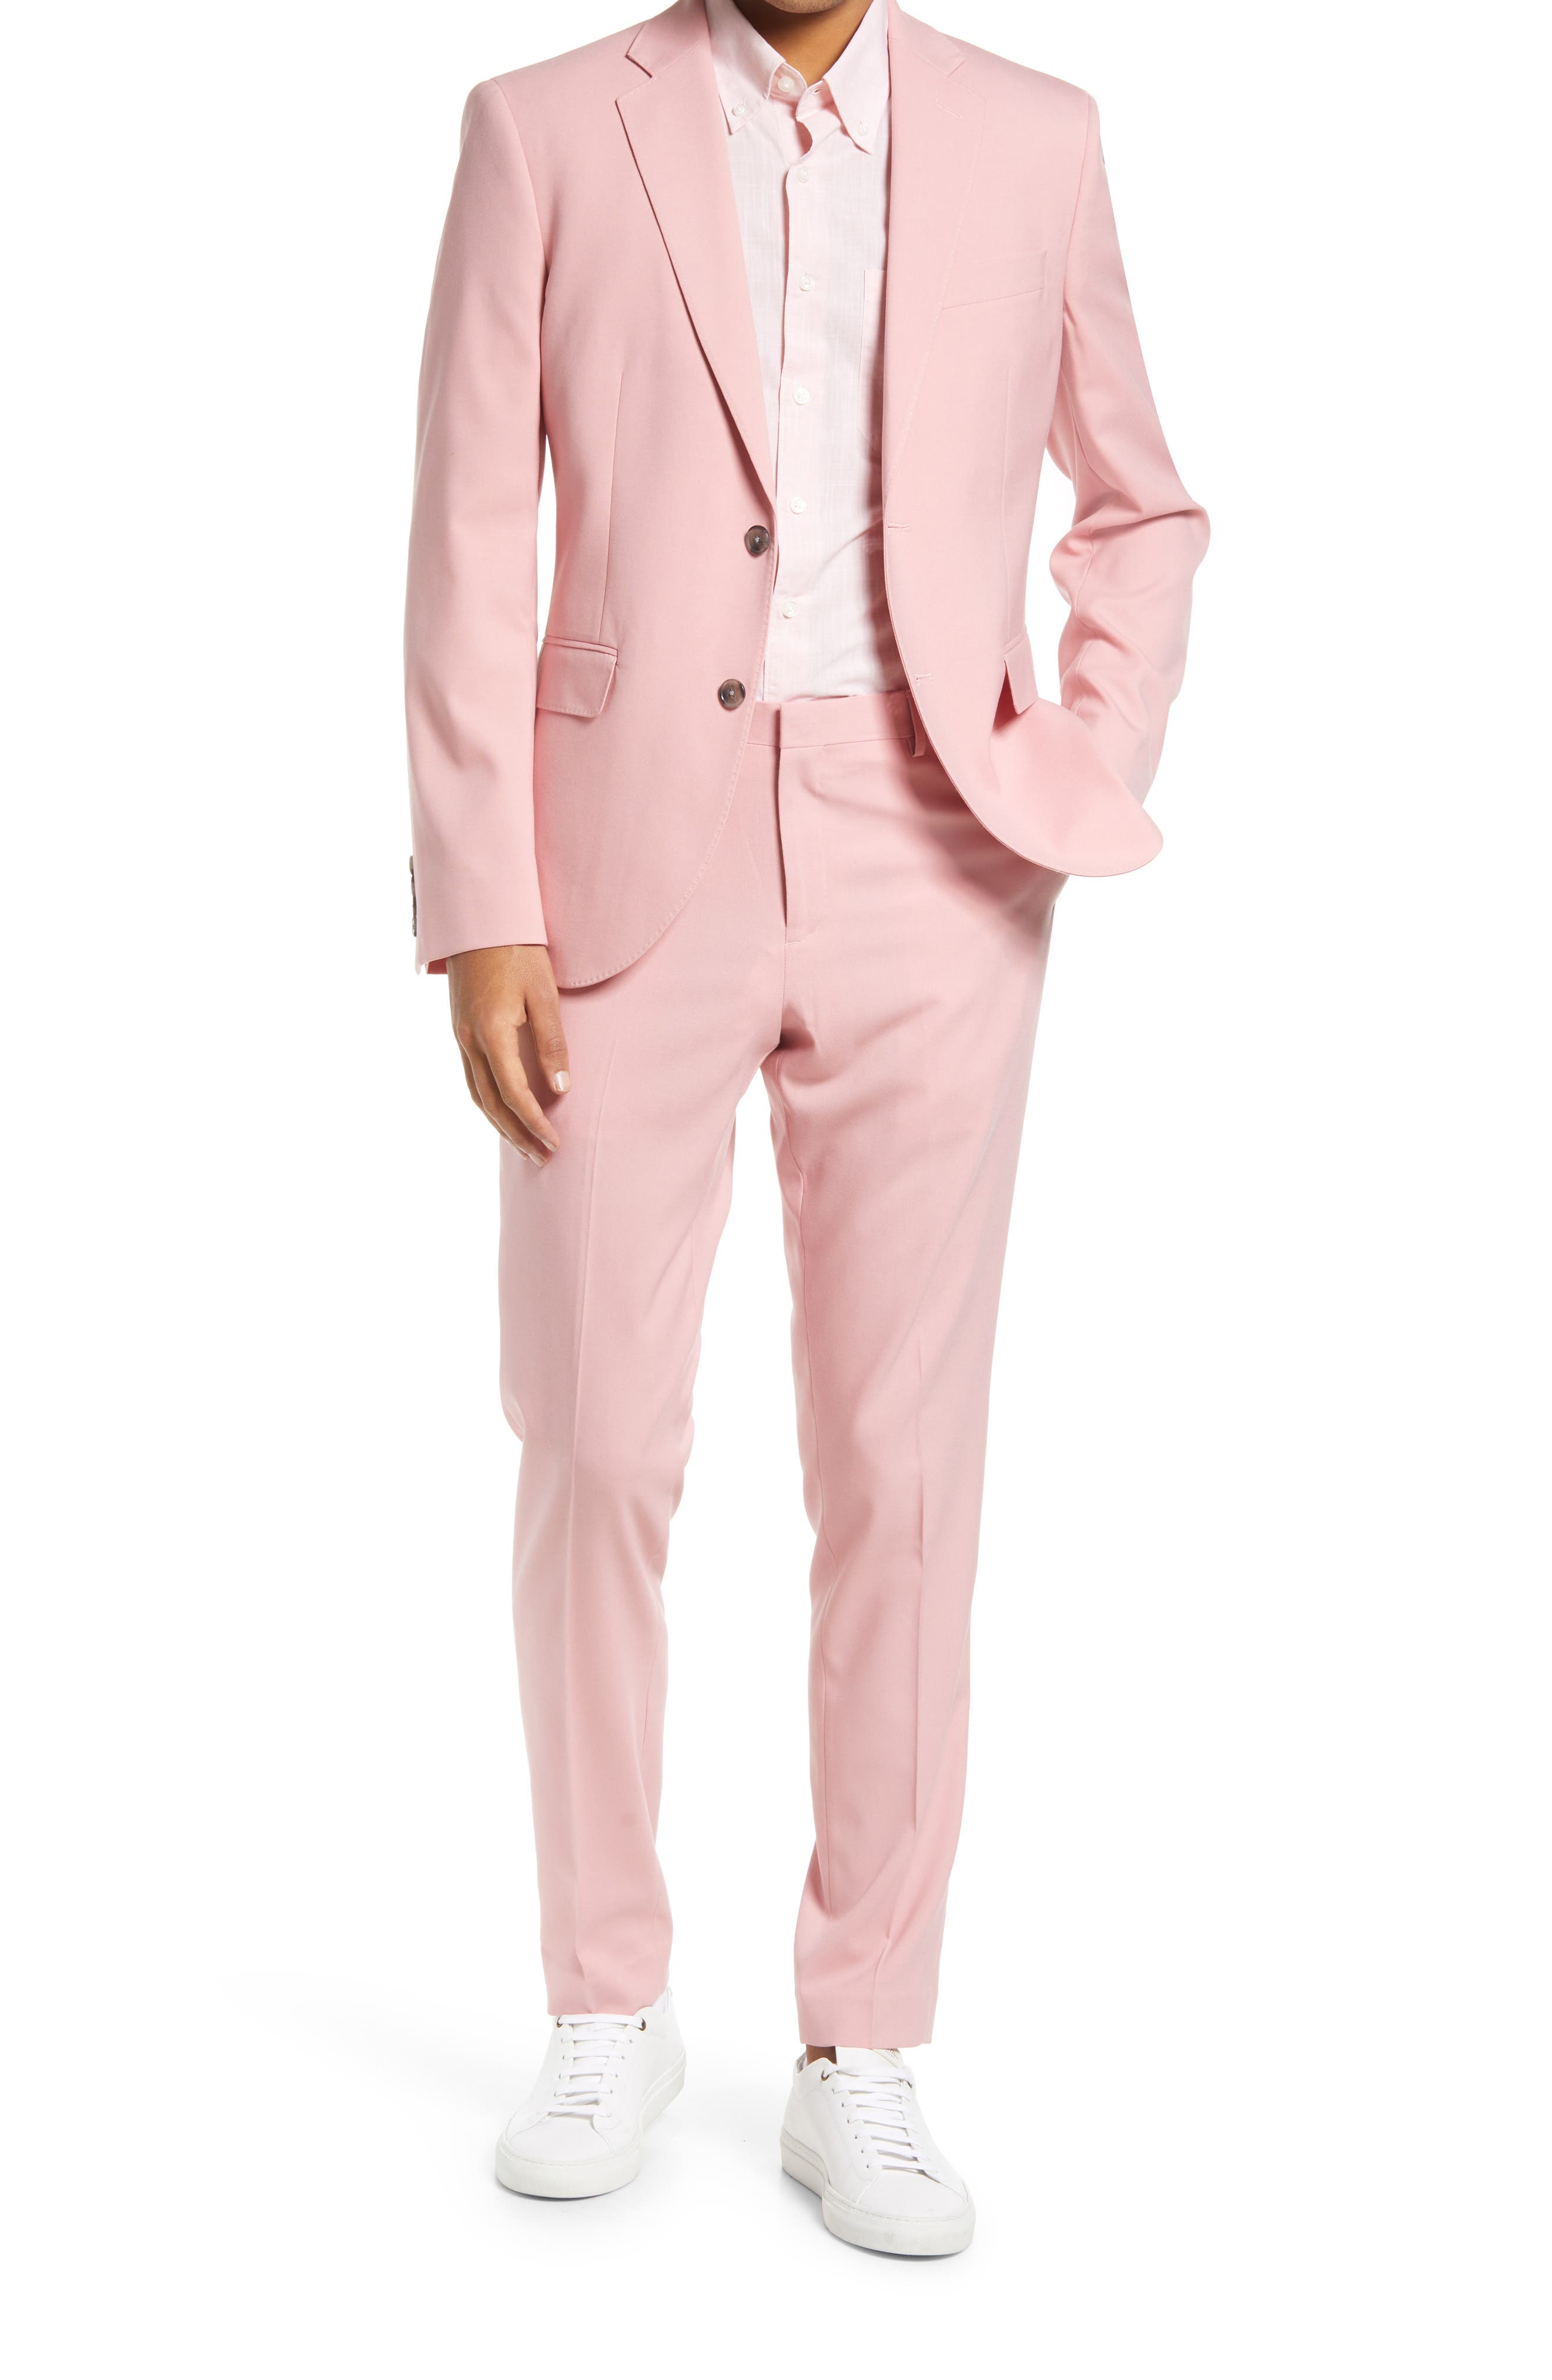 Pink Suits ☀ Separates for Men ...